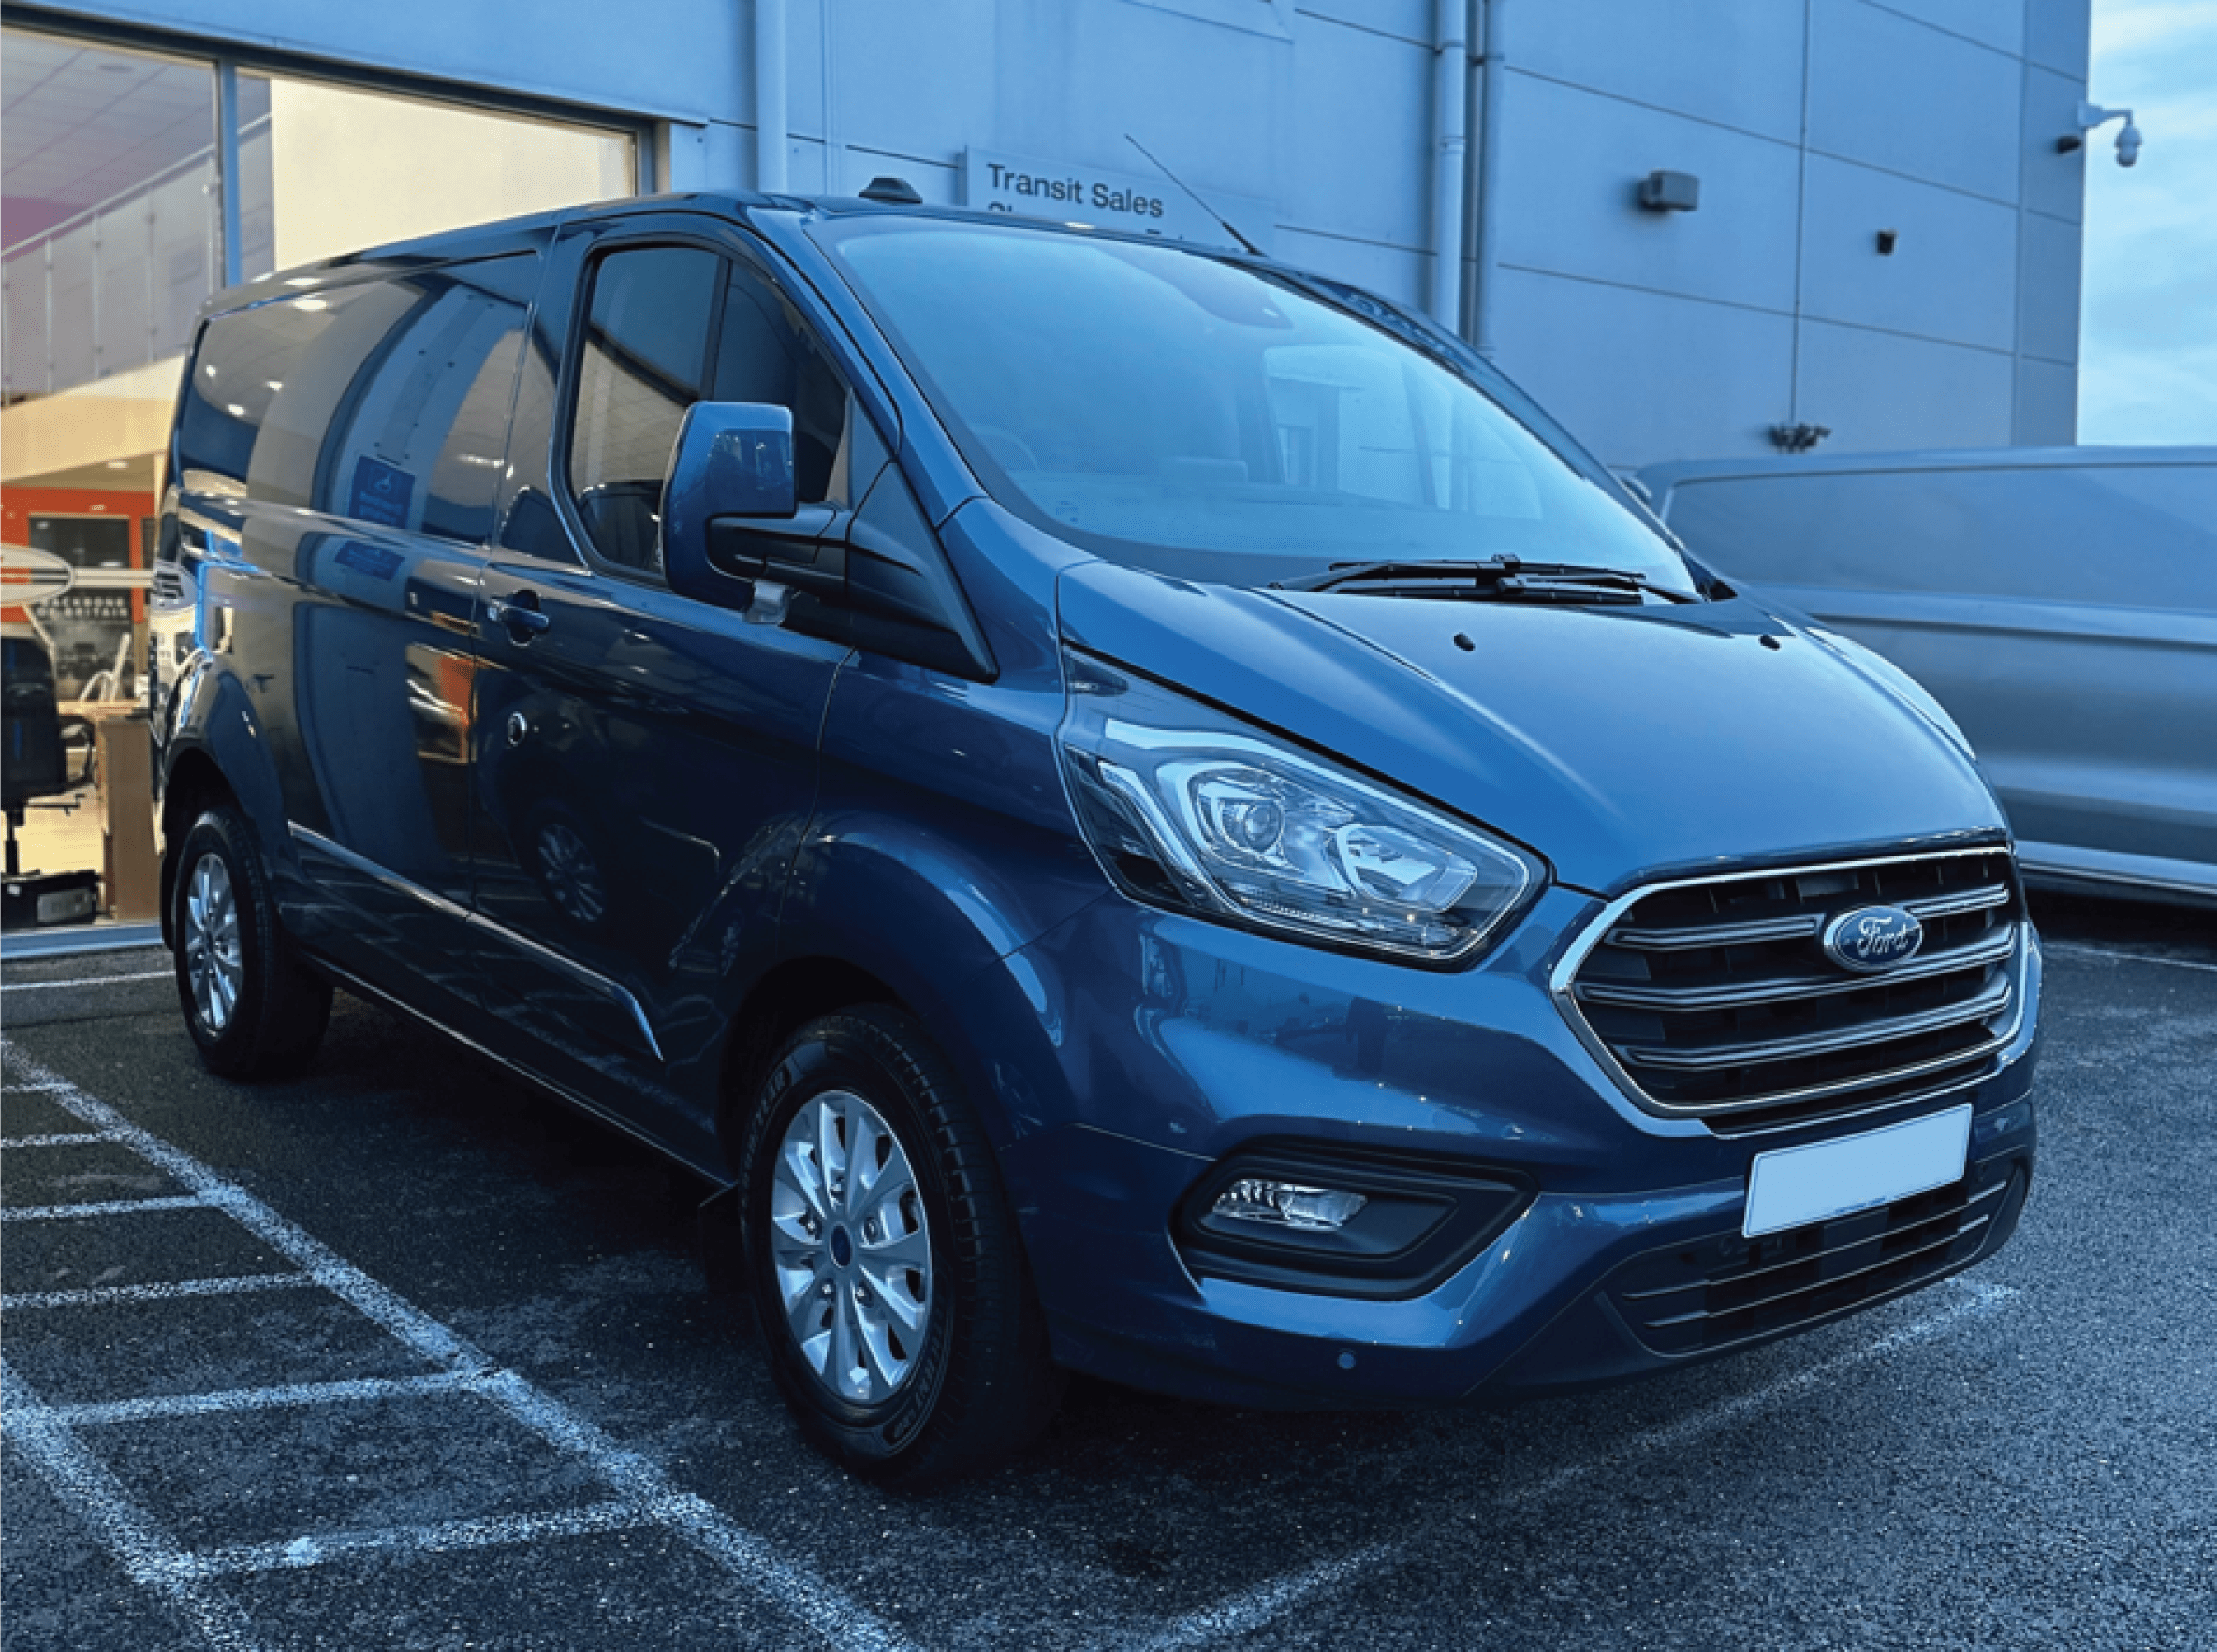 Ford Transit Custom Blue in stock now at Fordthorne cardiff